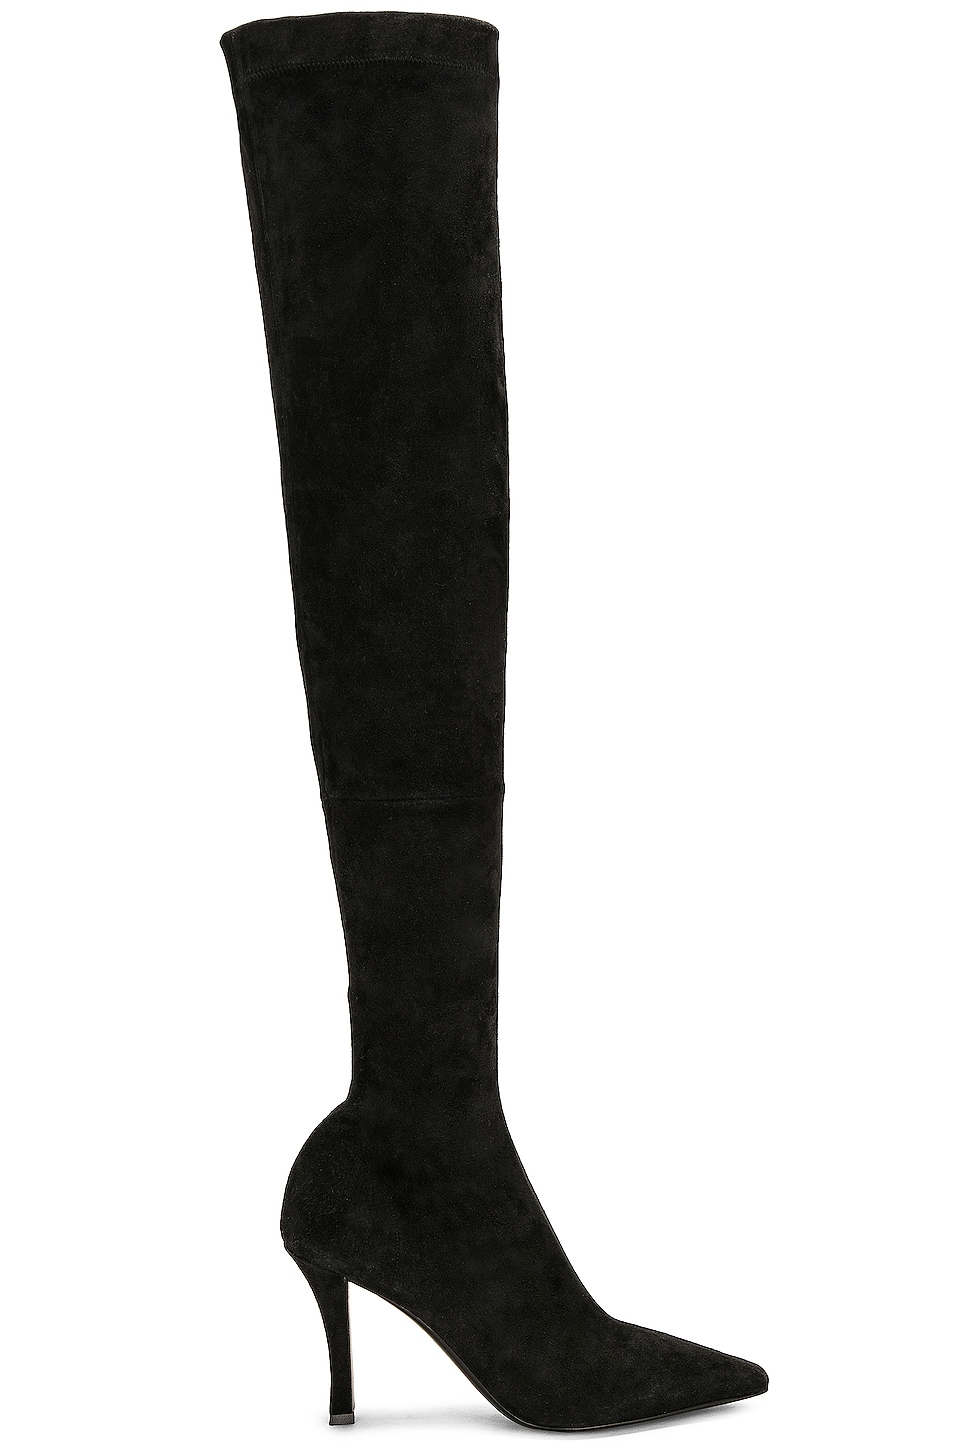 Image 1 of The Row Annette Boot in Black